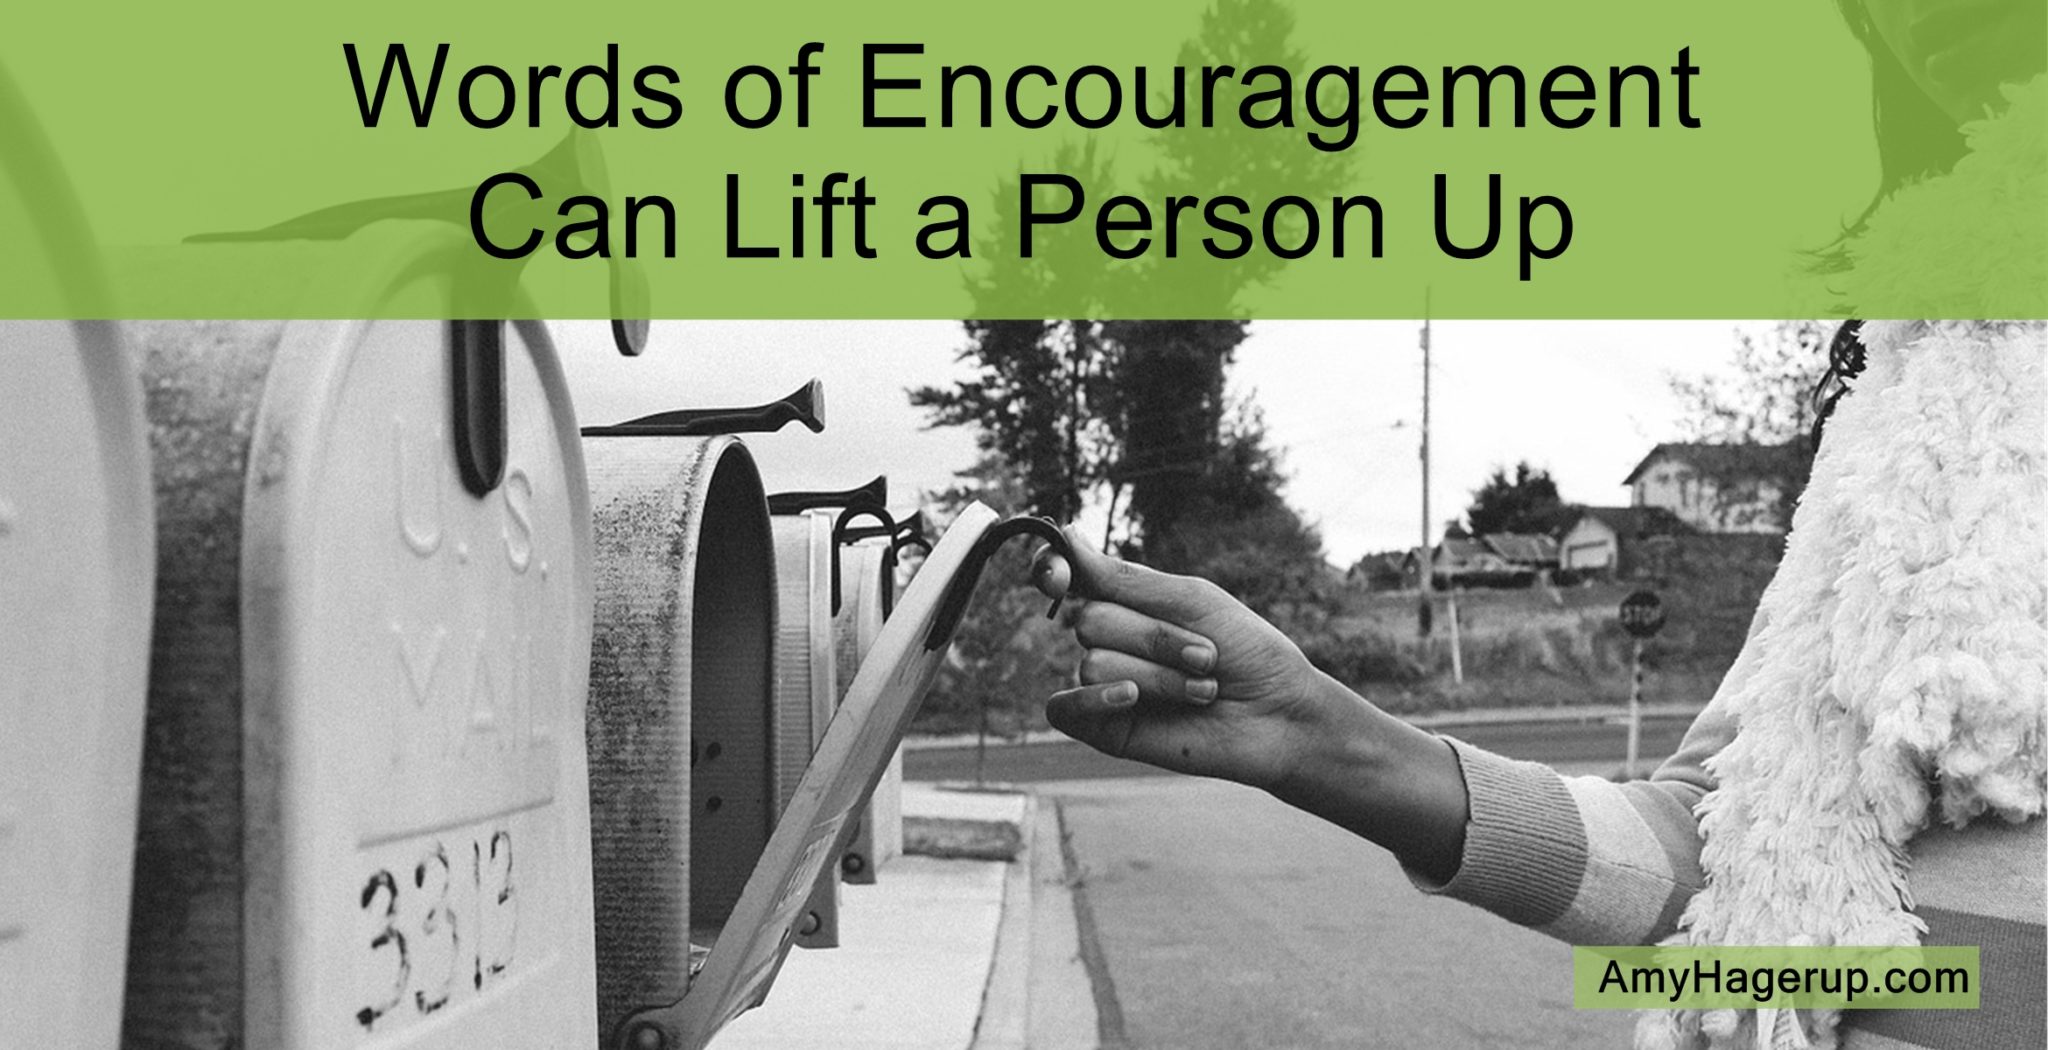 Words of encouragement can lift a person up in a big way.